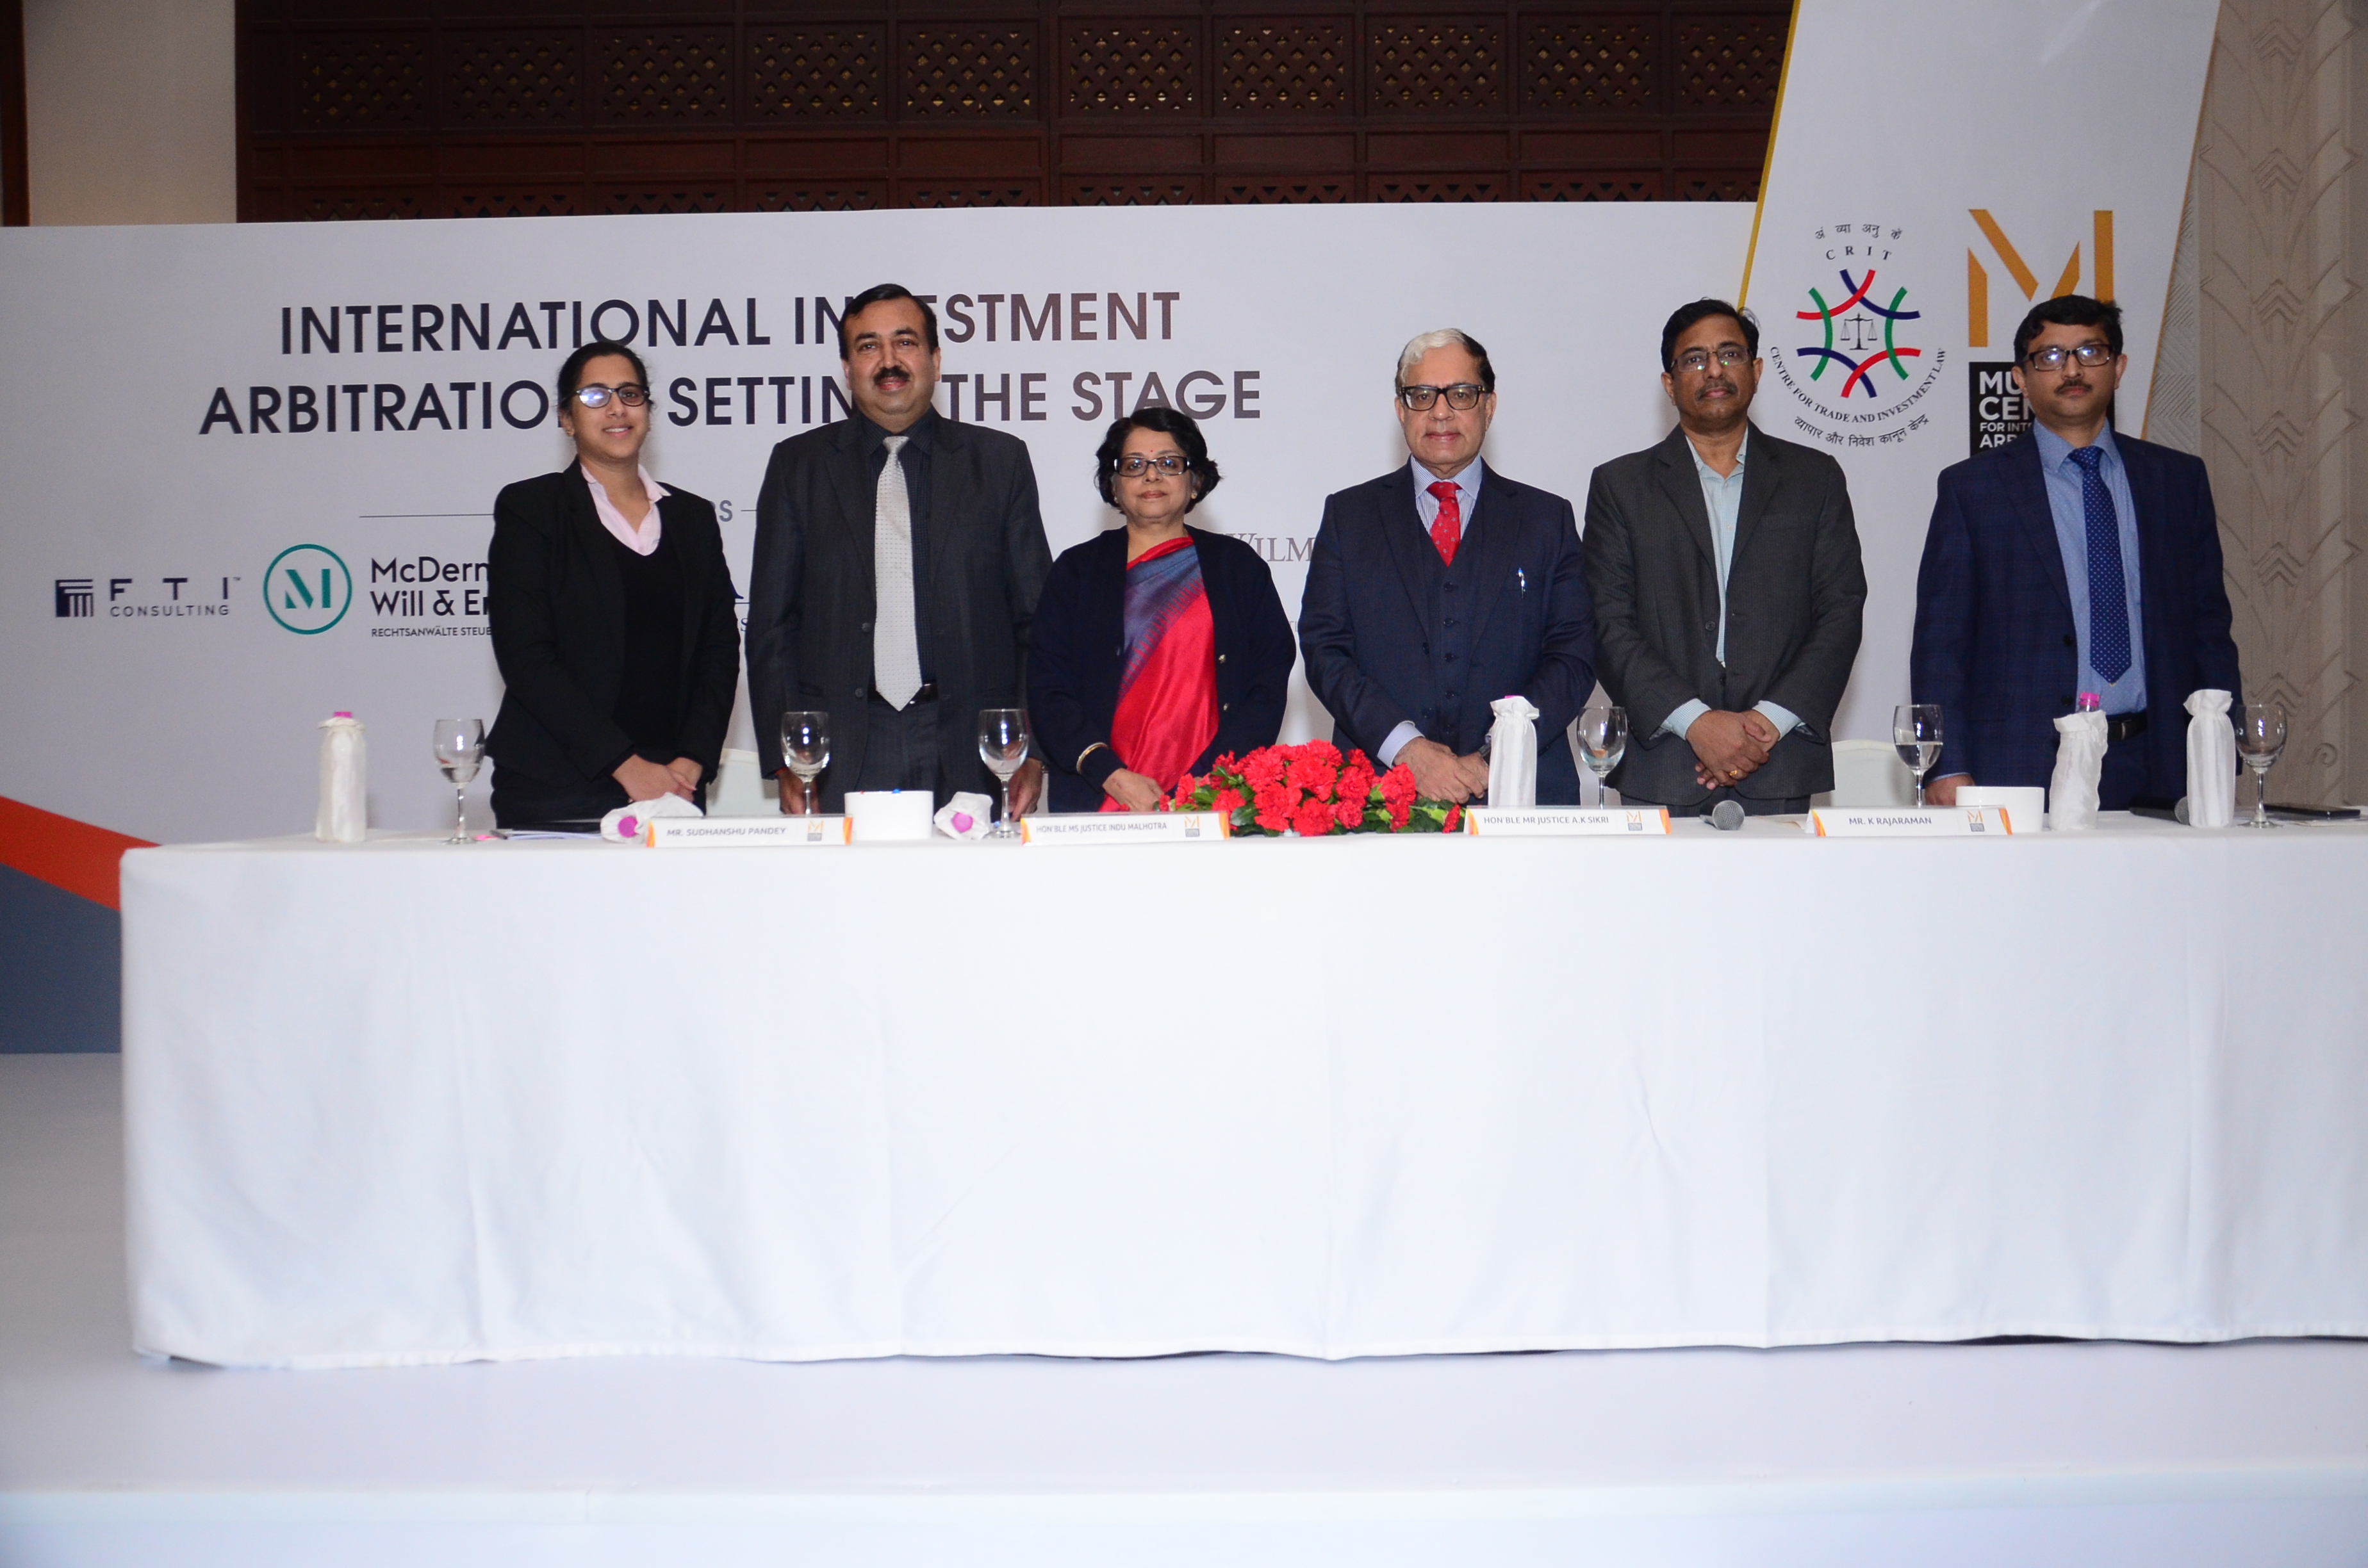 Conference on International Investment Arbitration organised by MCIA and CTIL